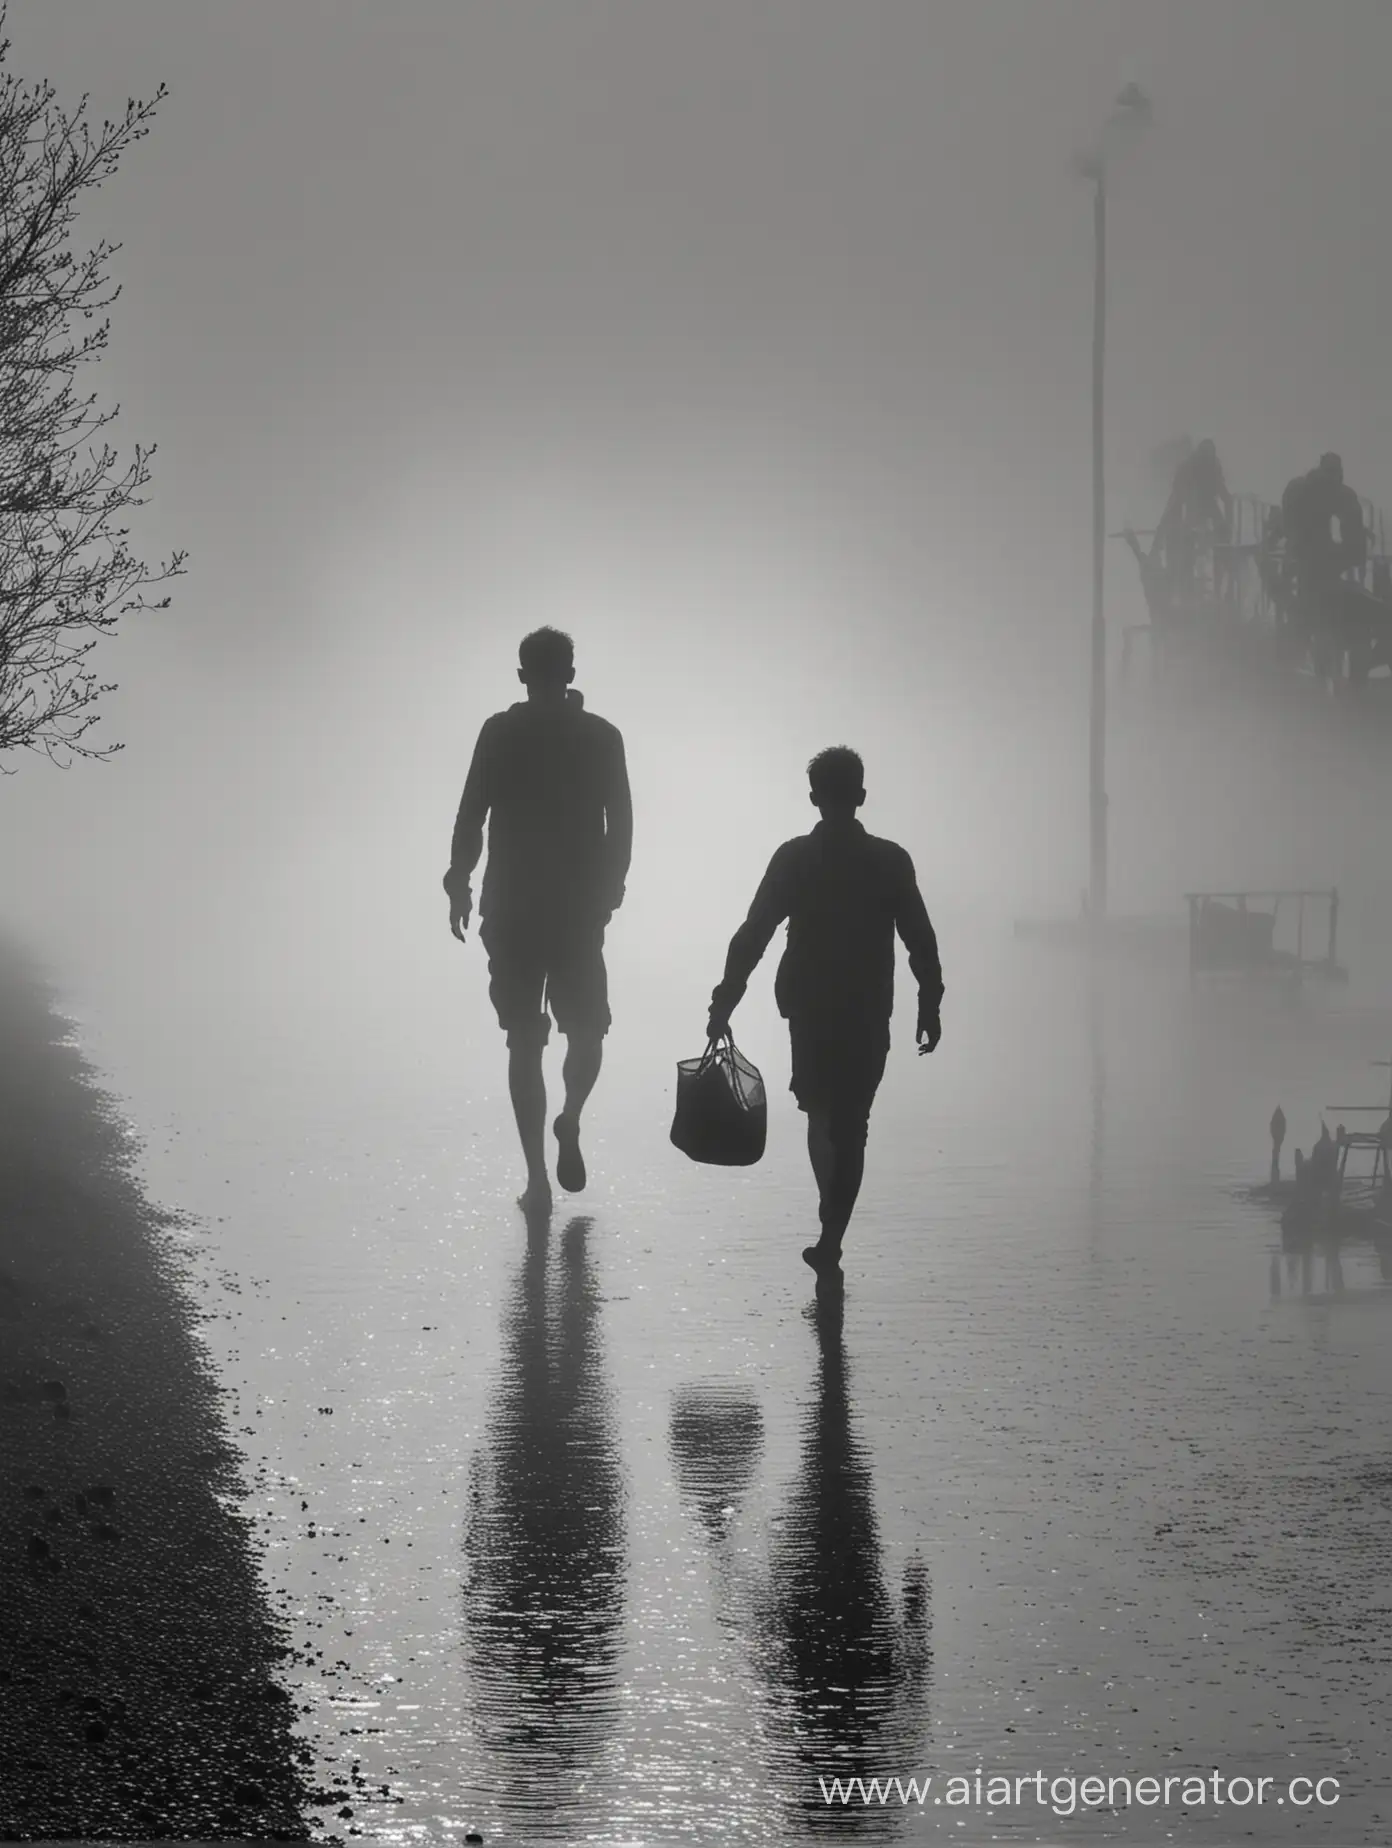 Silhouette-of-Man-and-Boy-Emerging-from-Mist-on-Embankment